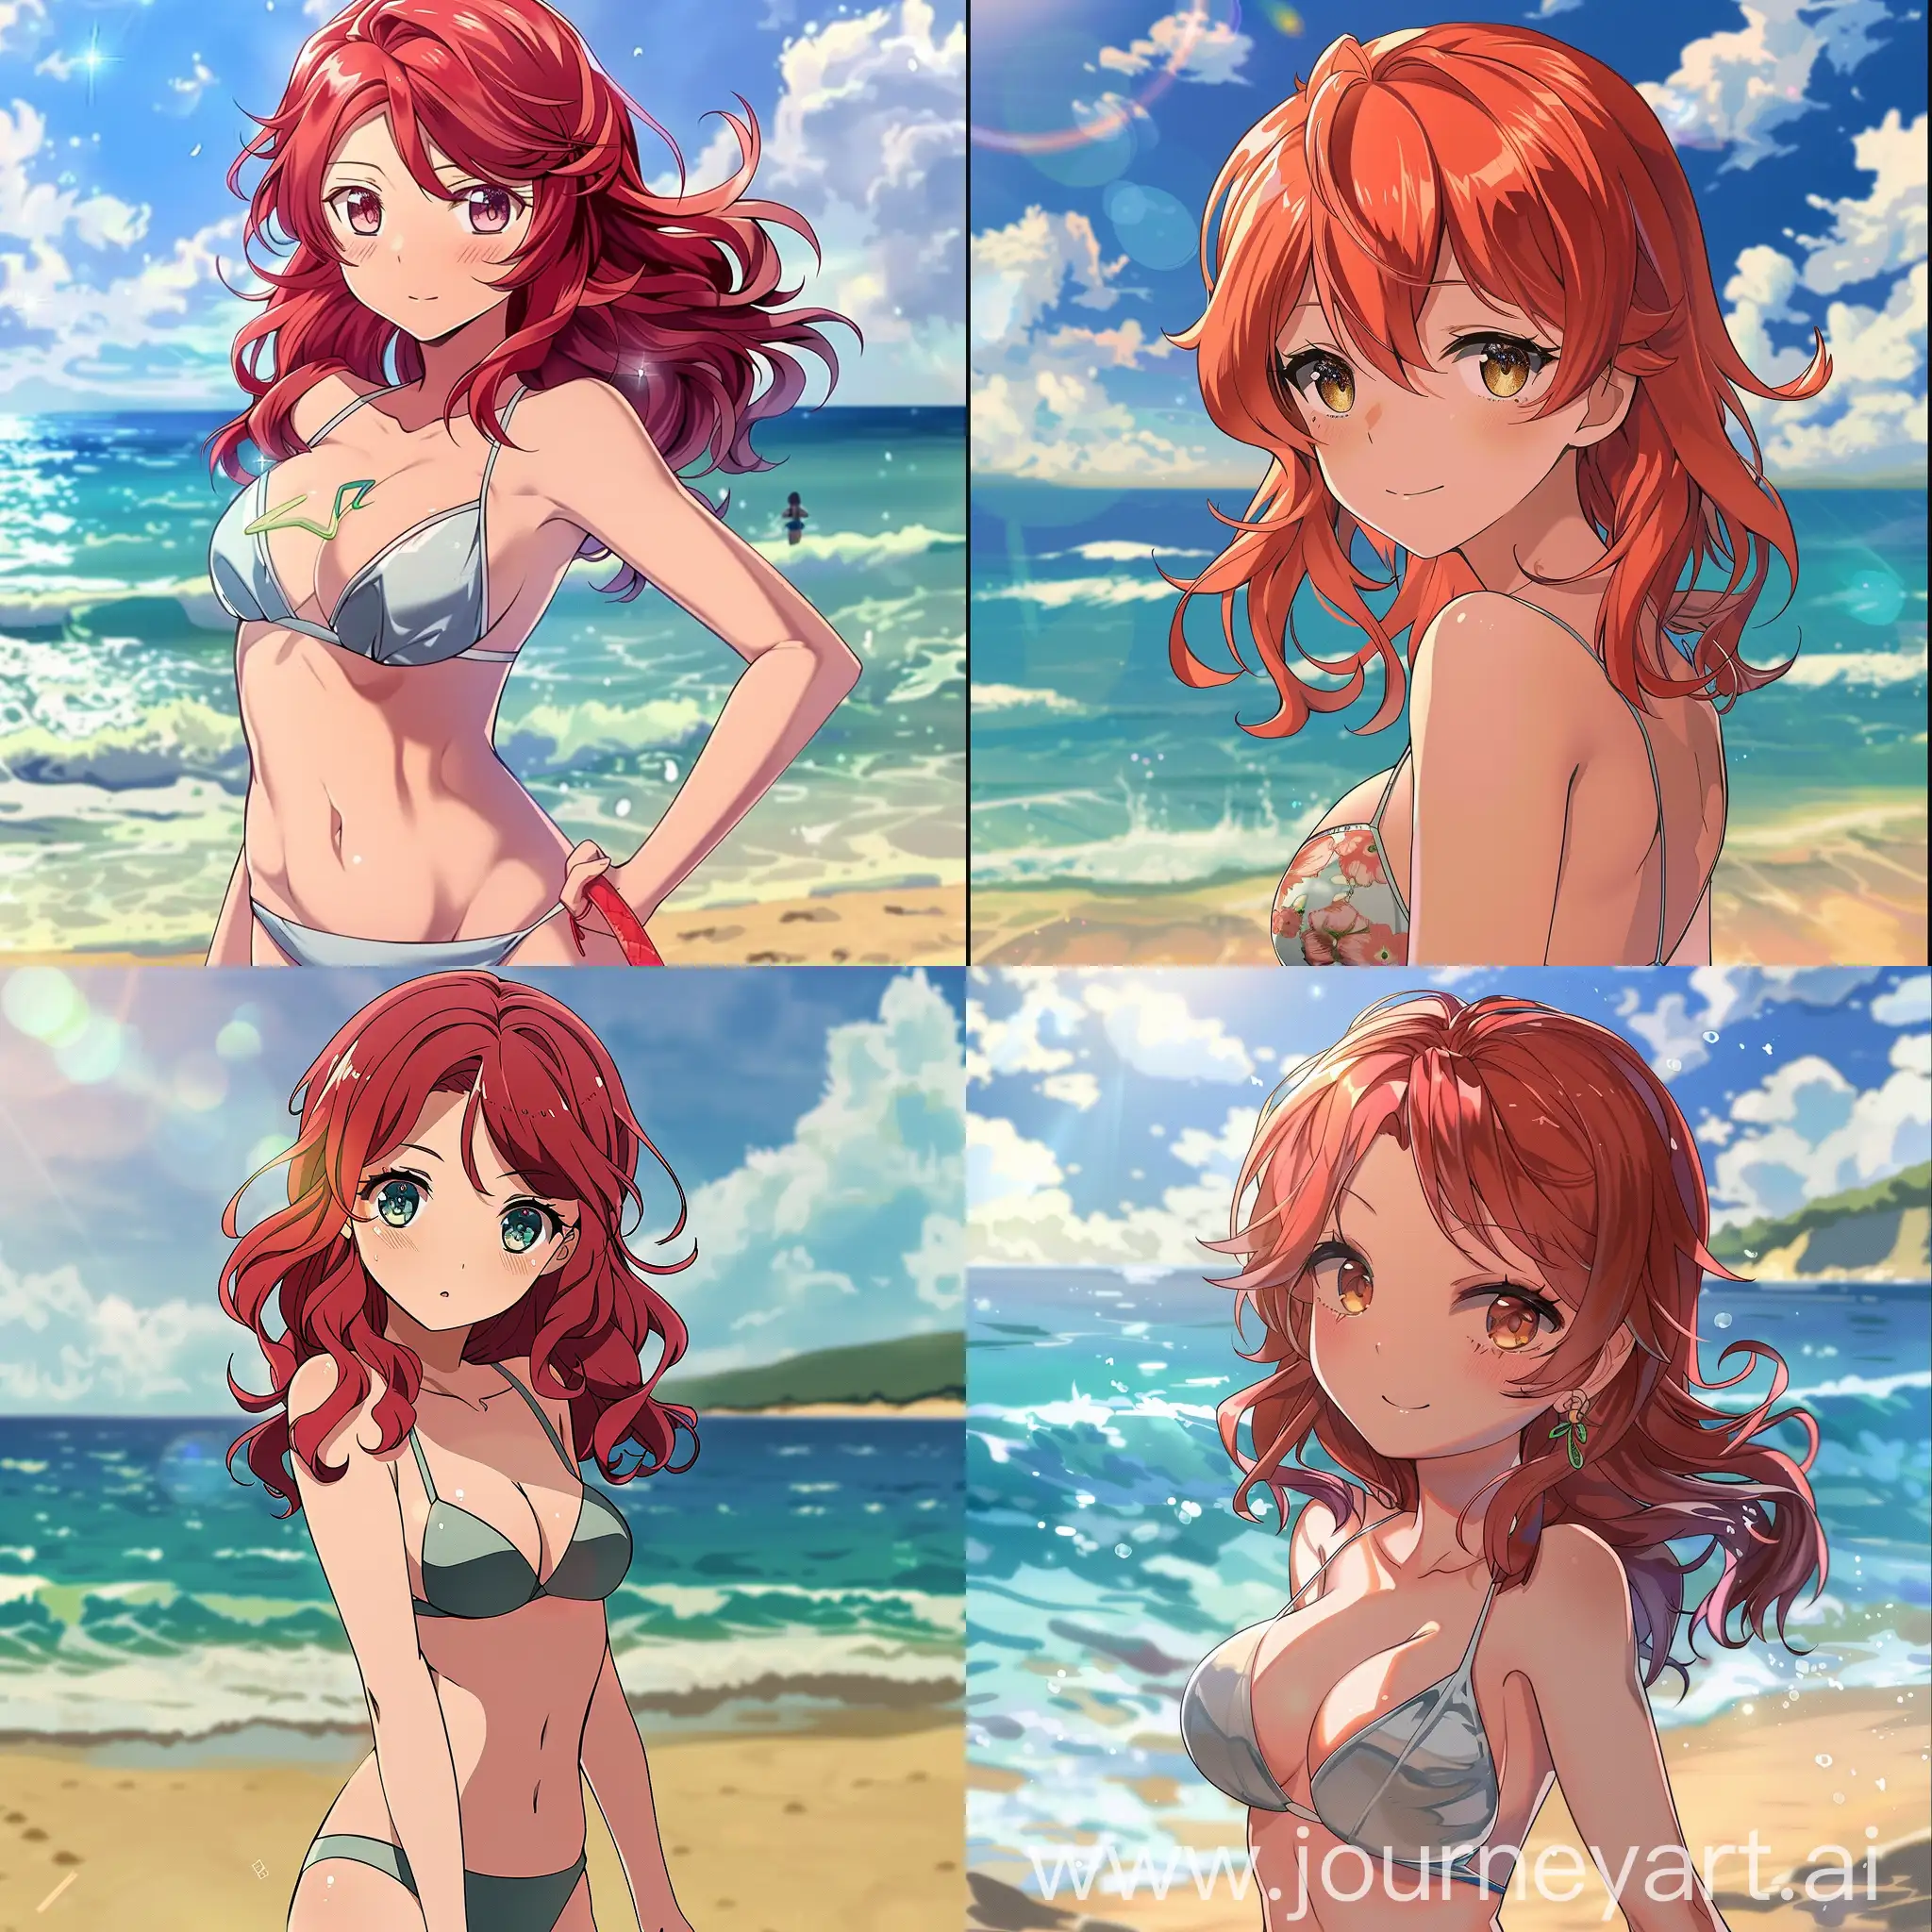 RedHaired-Anime-Girl-in-Swimsuit-Enjoying-Beach-Vibes